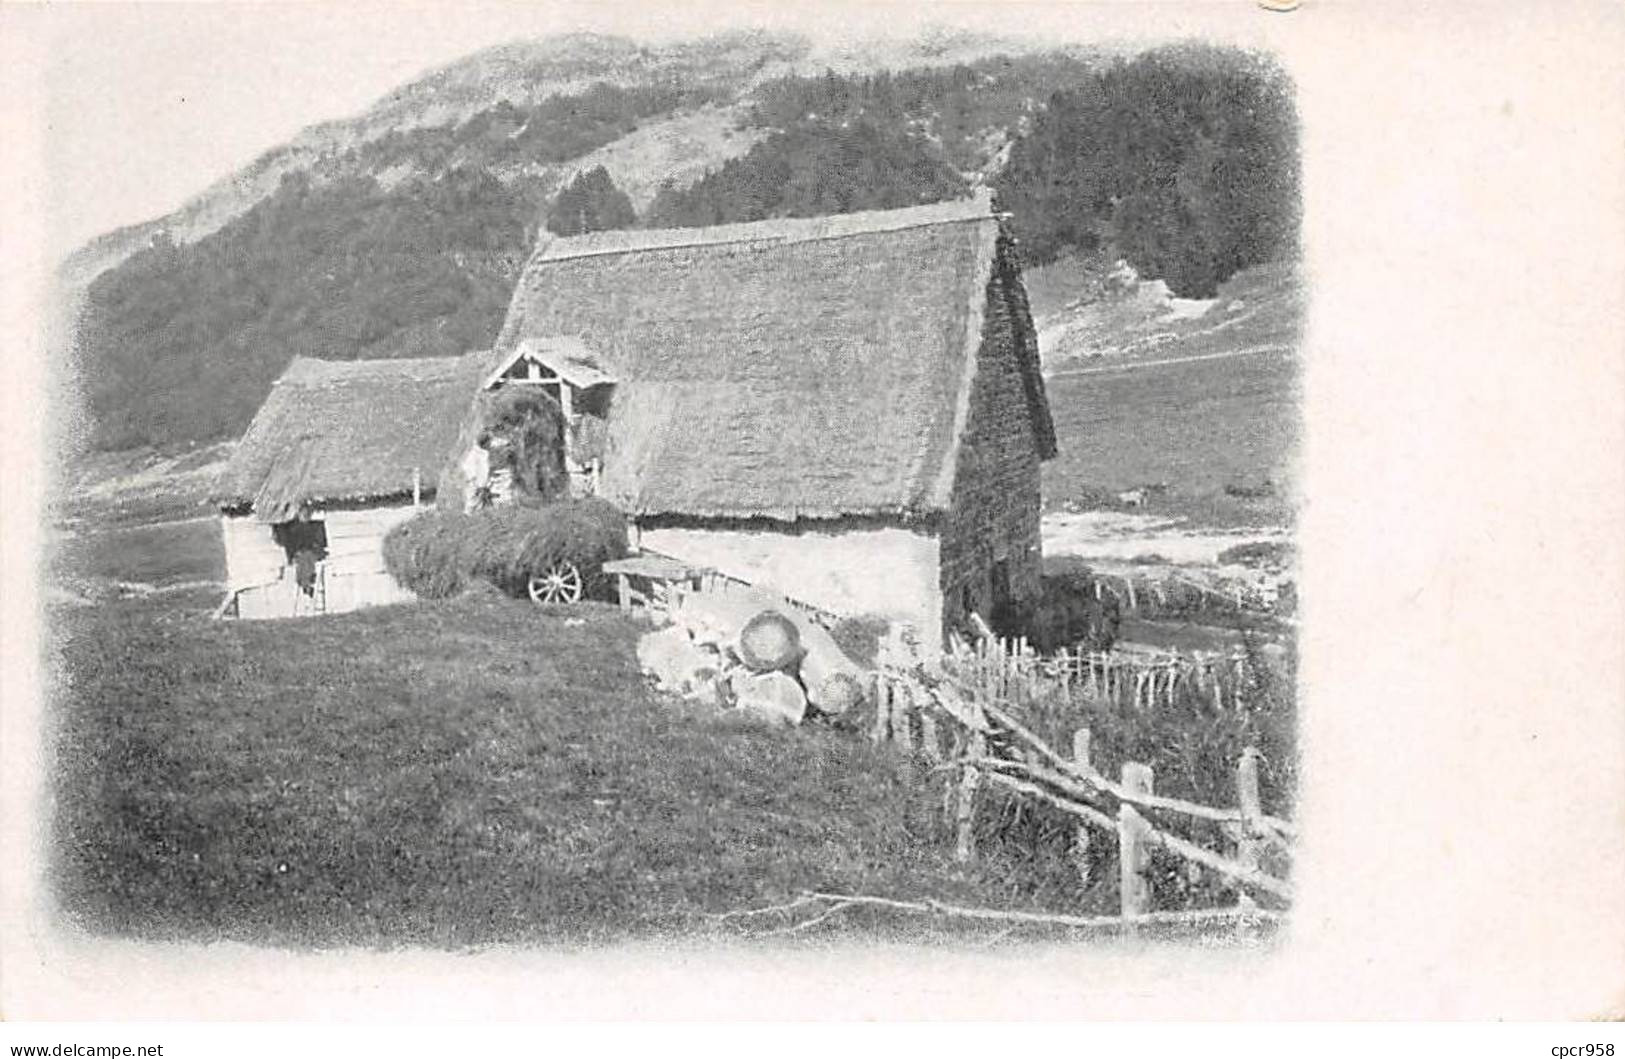 A Localiser - N°80707 - Maison, Type Bergerie - Agriculture - Carte Photo - To Identify